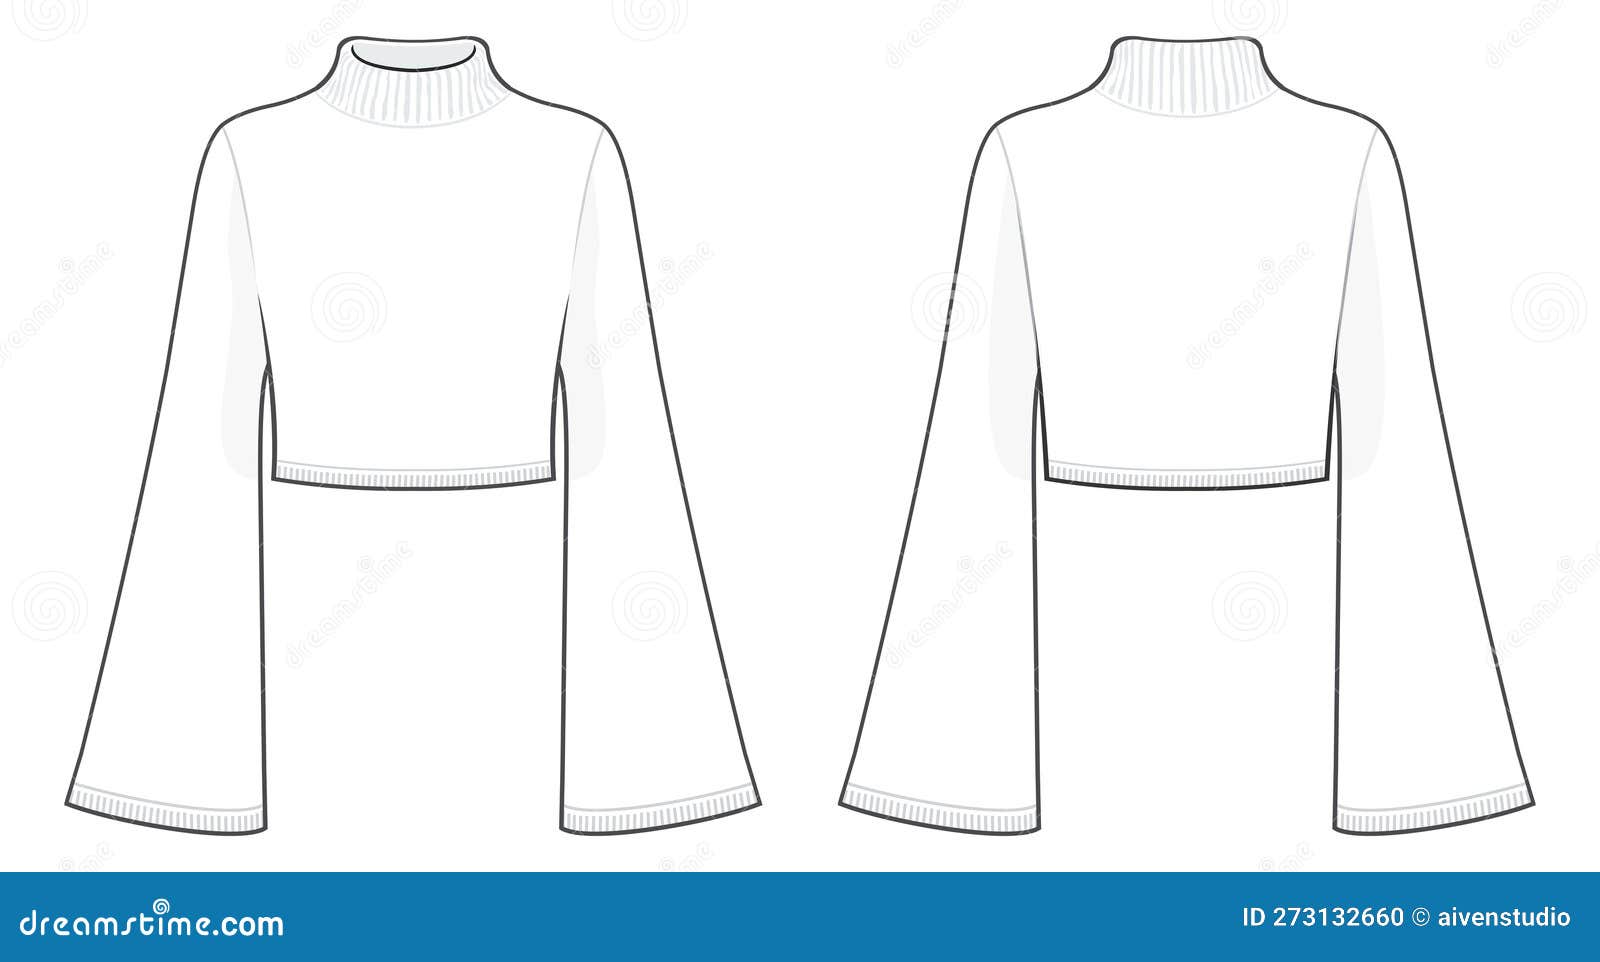 Vector Long Sleeved Dress Technical Drawing, Woman Mini Dress With Bow  Detail Fashion CAD, Dress Sketch With Long Bell Sleeves Template, Sketch,  Flat. Jersey Dress With Front, Back View, White Color Royalty